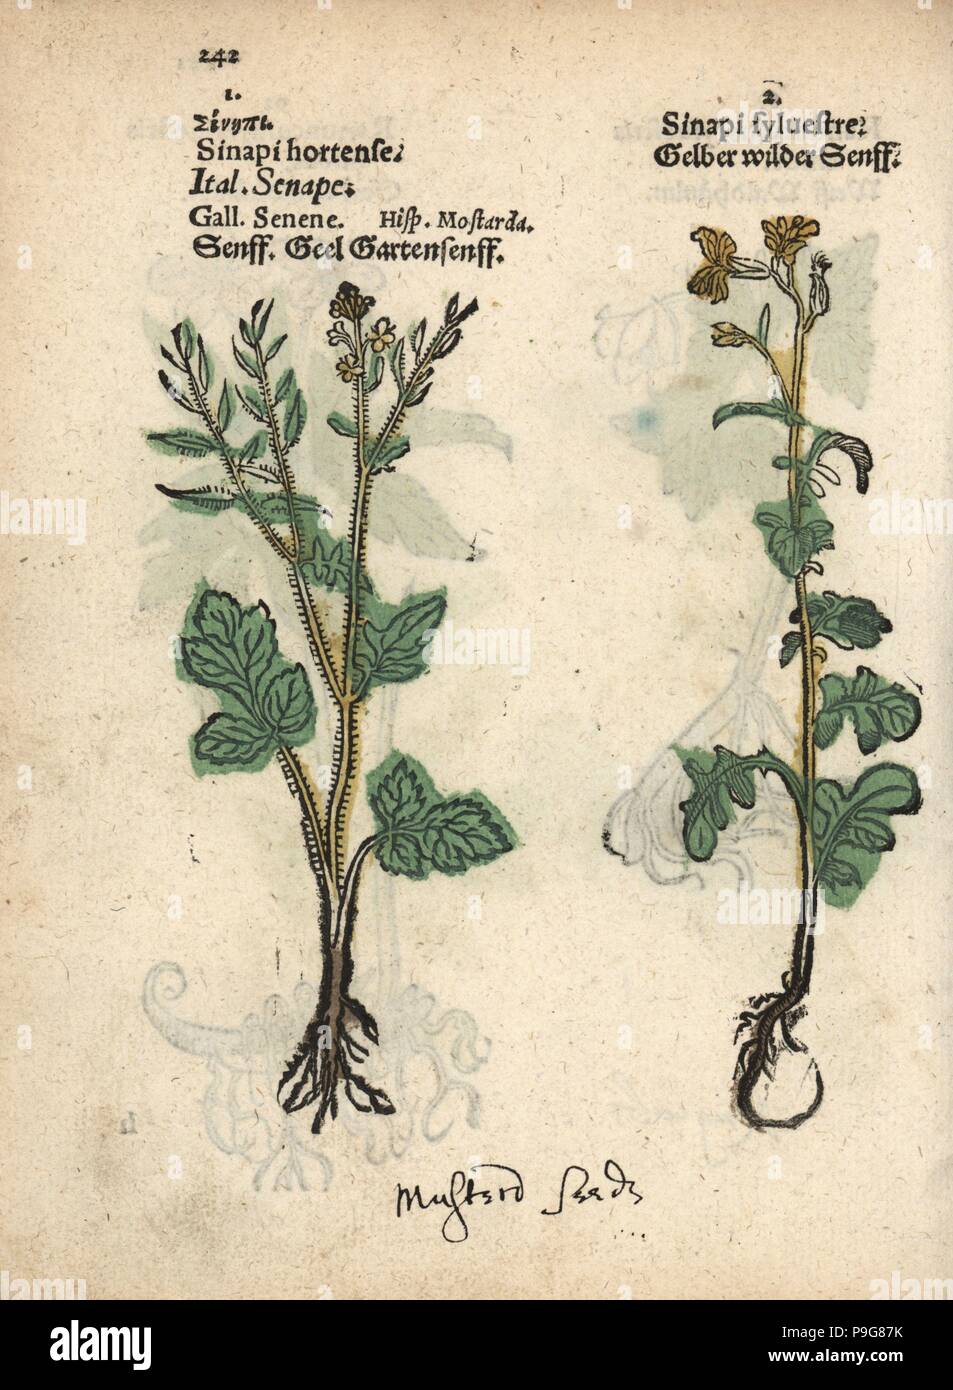 White mustard, Sinapis alba, and hedge mustard, Sisymbrium officinale. Handcoloured woodblock engraving of a botanical illustration from Adam Lonicer's Krauterbuch, or Herbal, Frankfurt, 1557. This from a 17th century pirate edition or atlas of illustrations only, with captions in Latin, Greek, French, Italian, German, and in English manuscript. Stock Photo